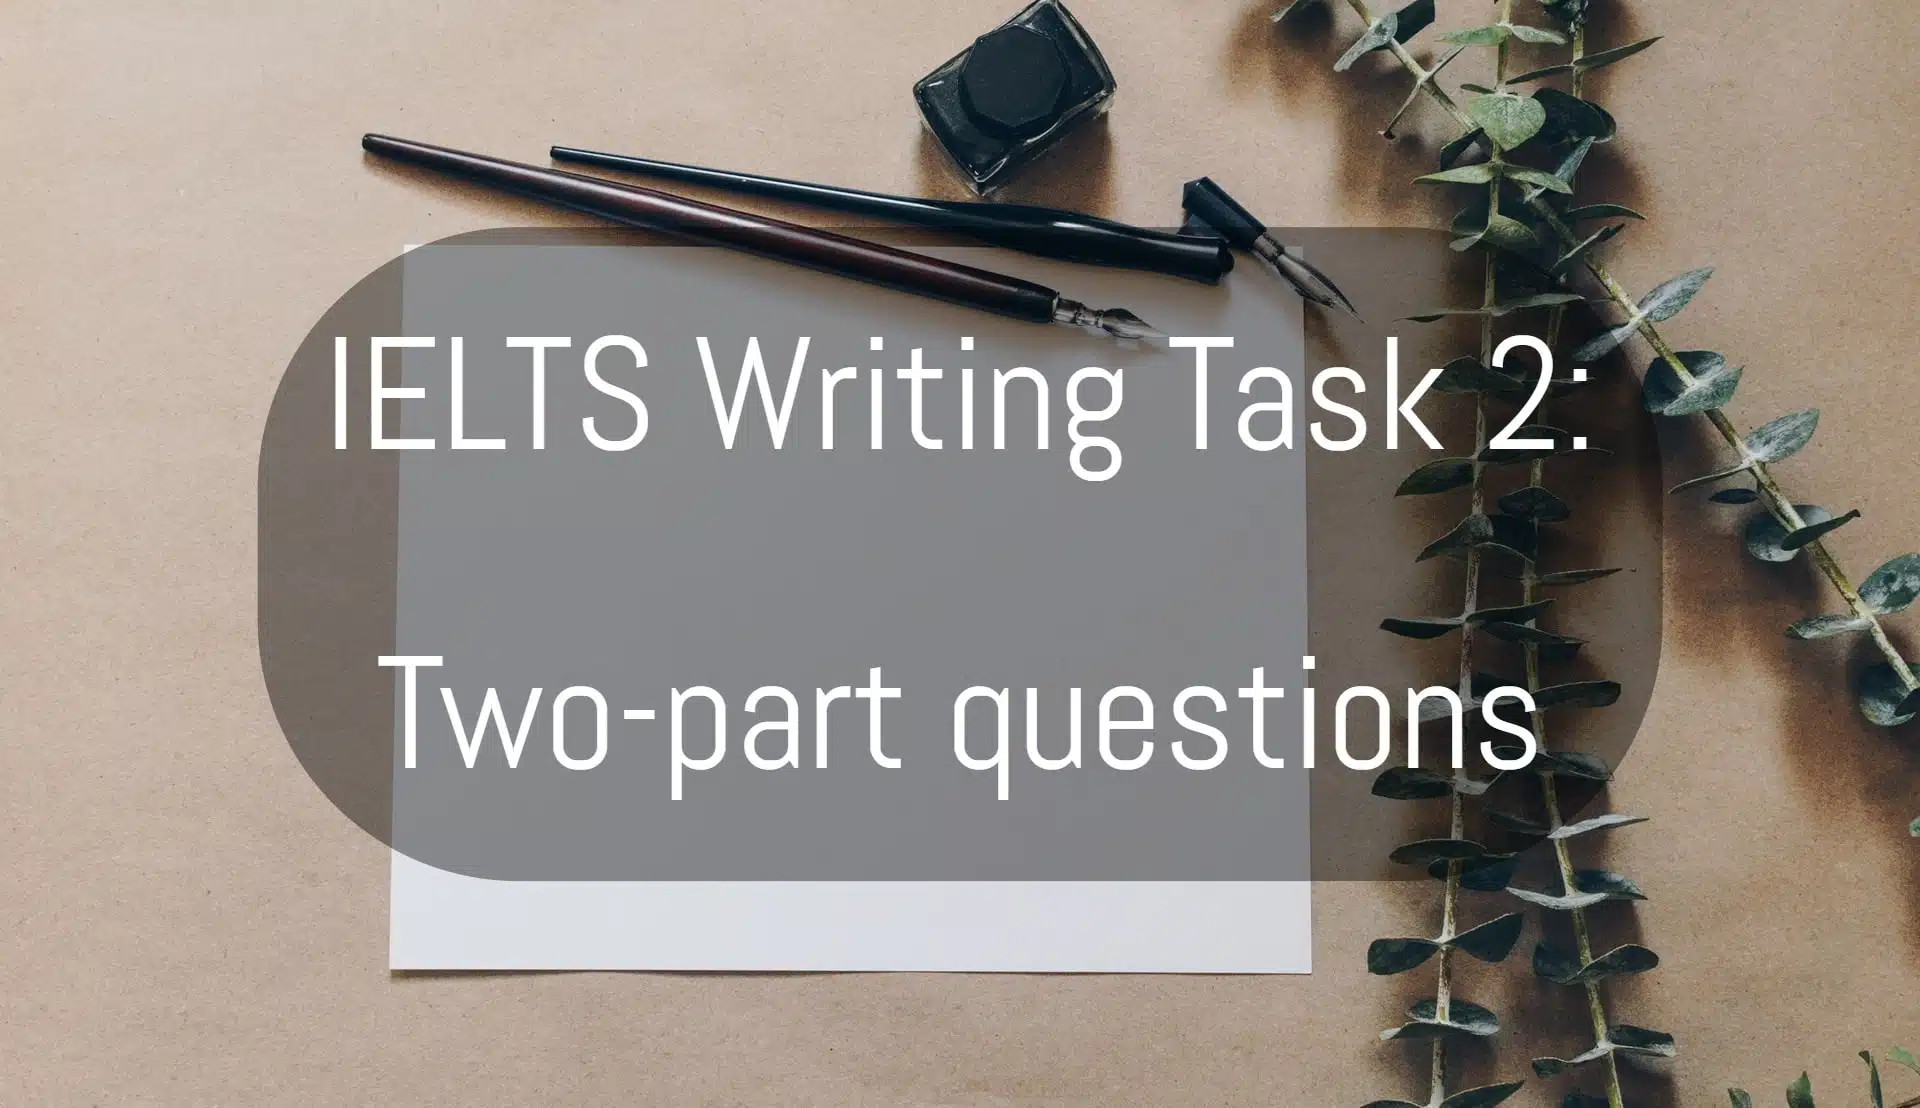 IELTS writing task 2 two-part questions